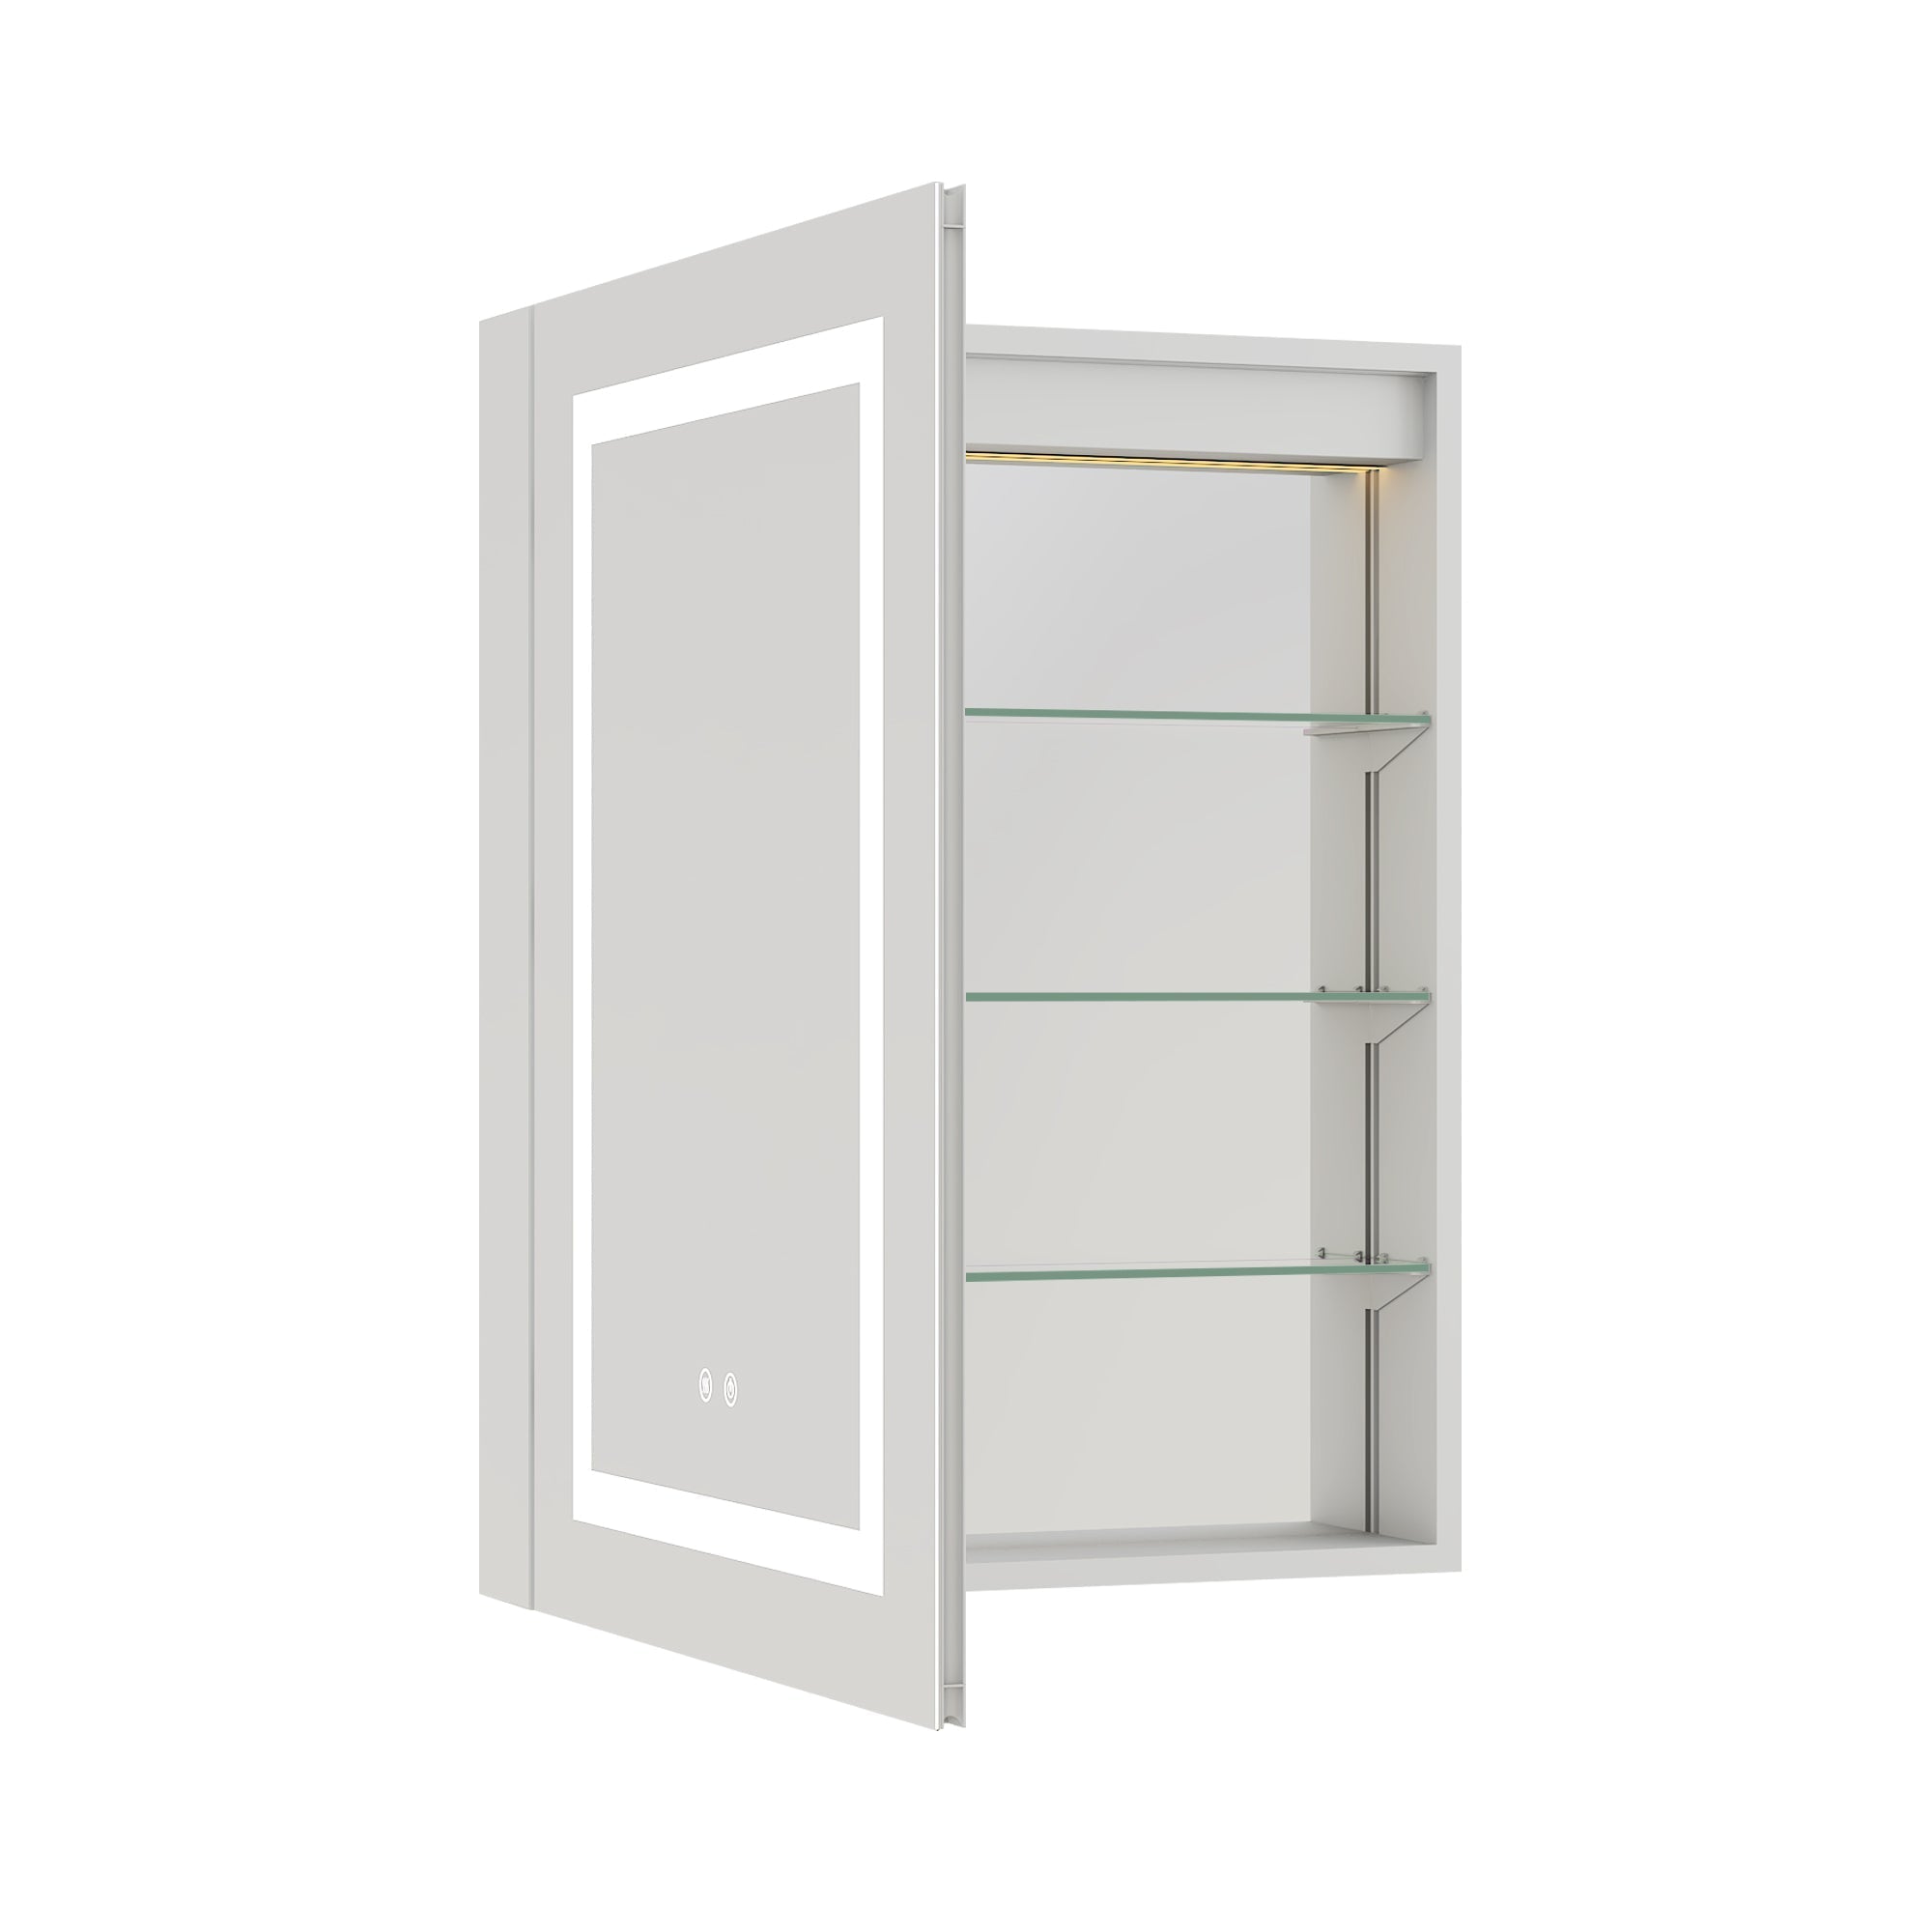 24 in. x 30 in. LED Lighted Surface/Recessed Mount Silver Mirrored Medicine Cabinet with Outlet left Side